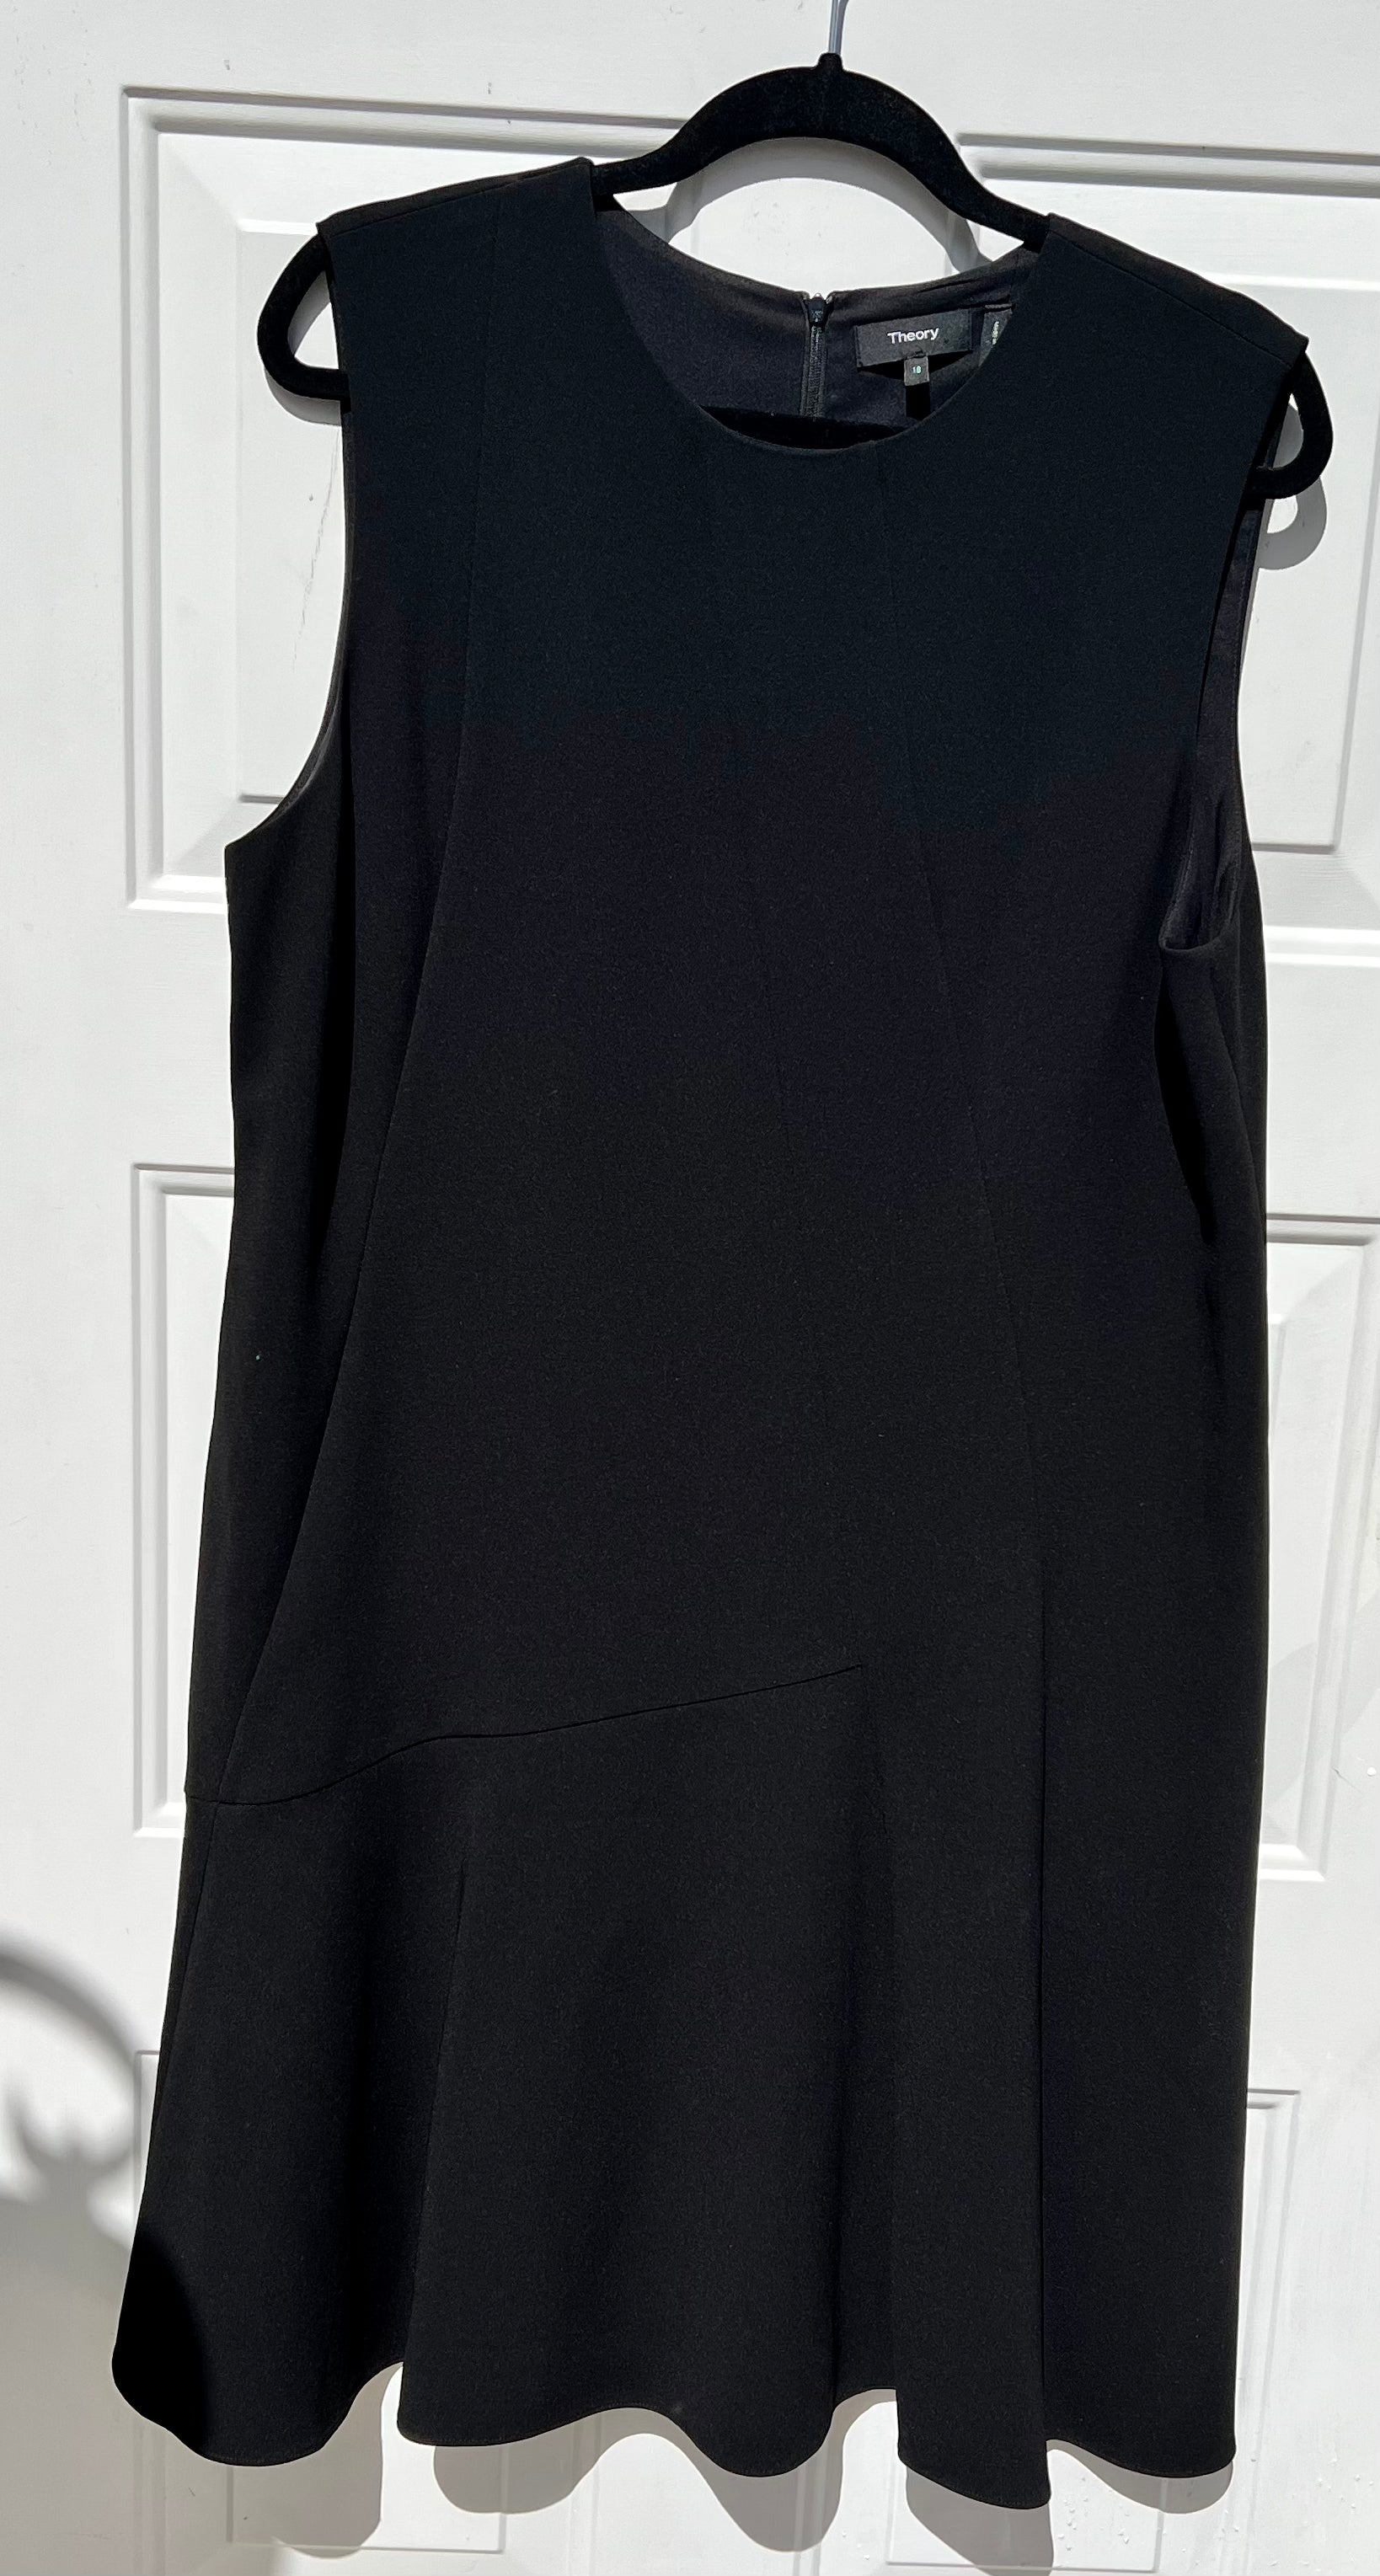 Theory Asym Drape Fit-and-flare dress size 18